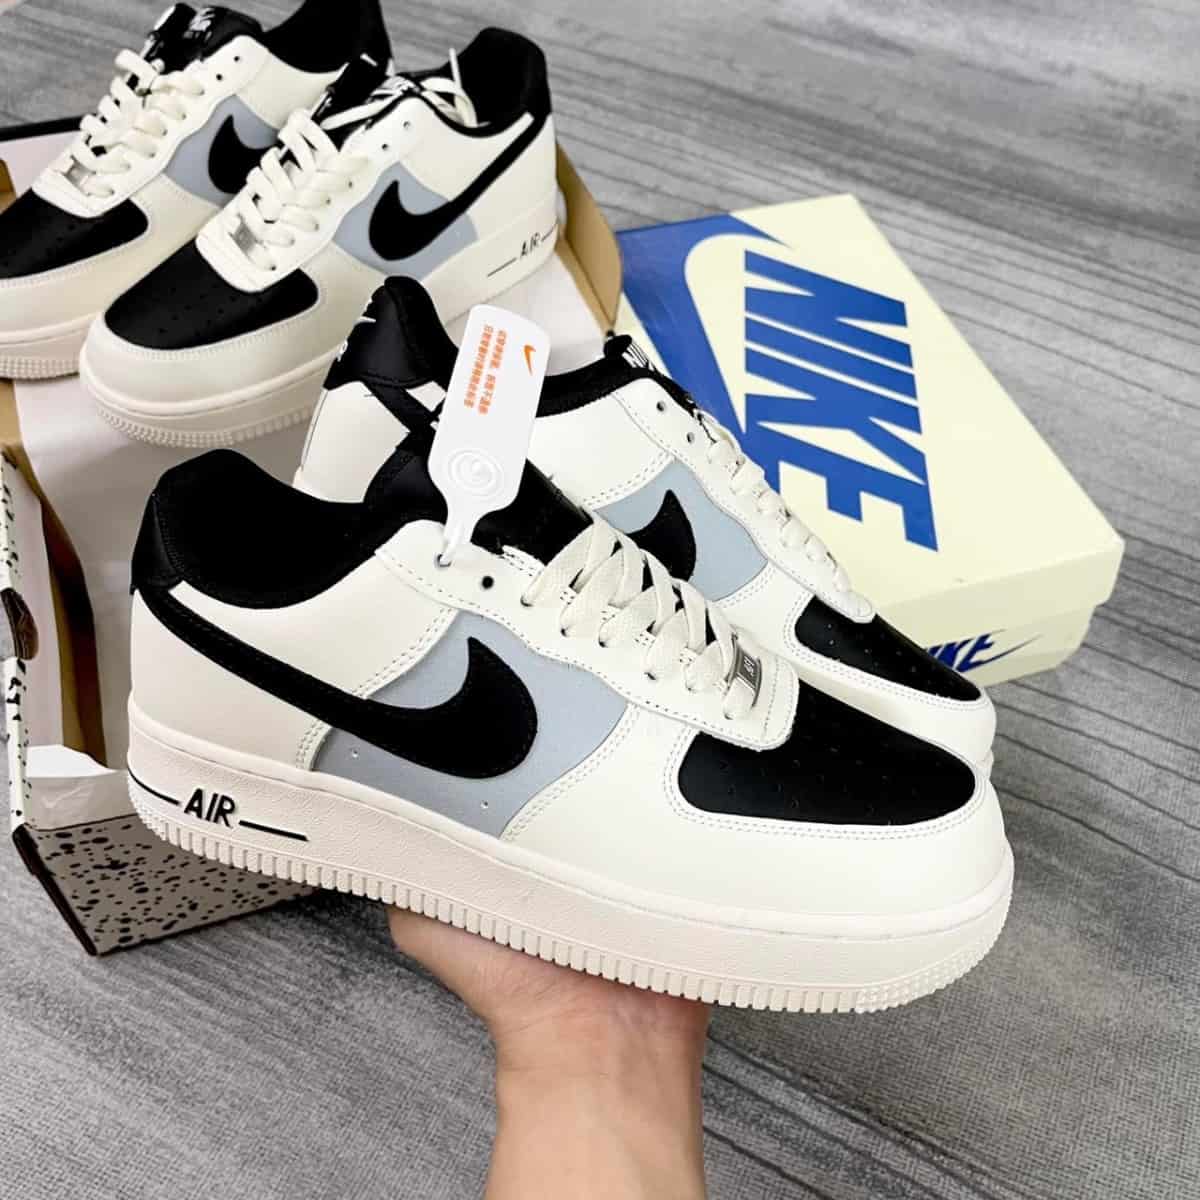 Giày Nike Air Force 1 Low LV8 EMB Leather White Black Blue